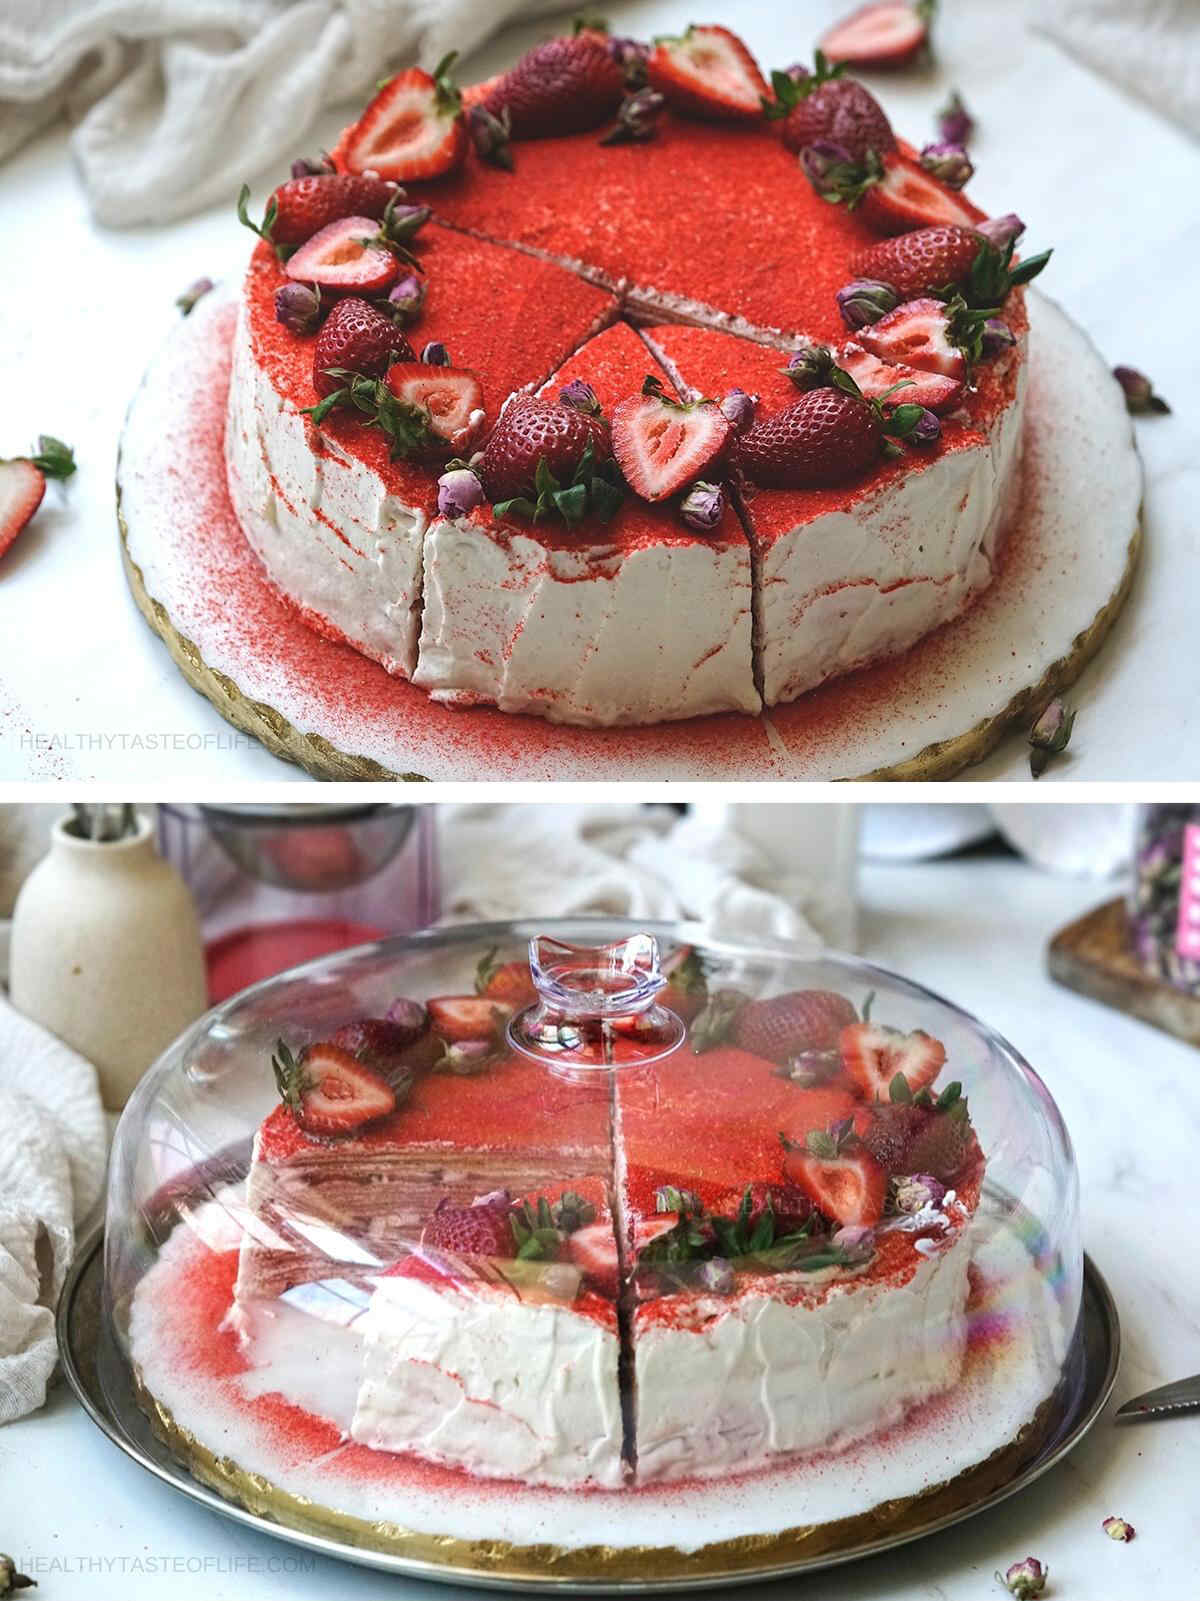 Keep the strawberry crepe cake in the fridge covered when storing.